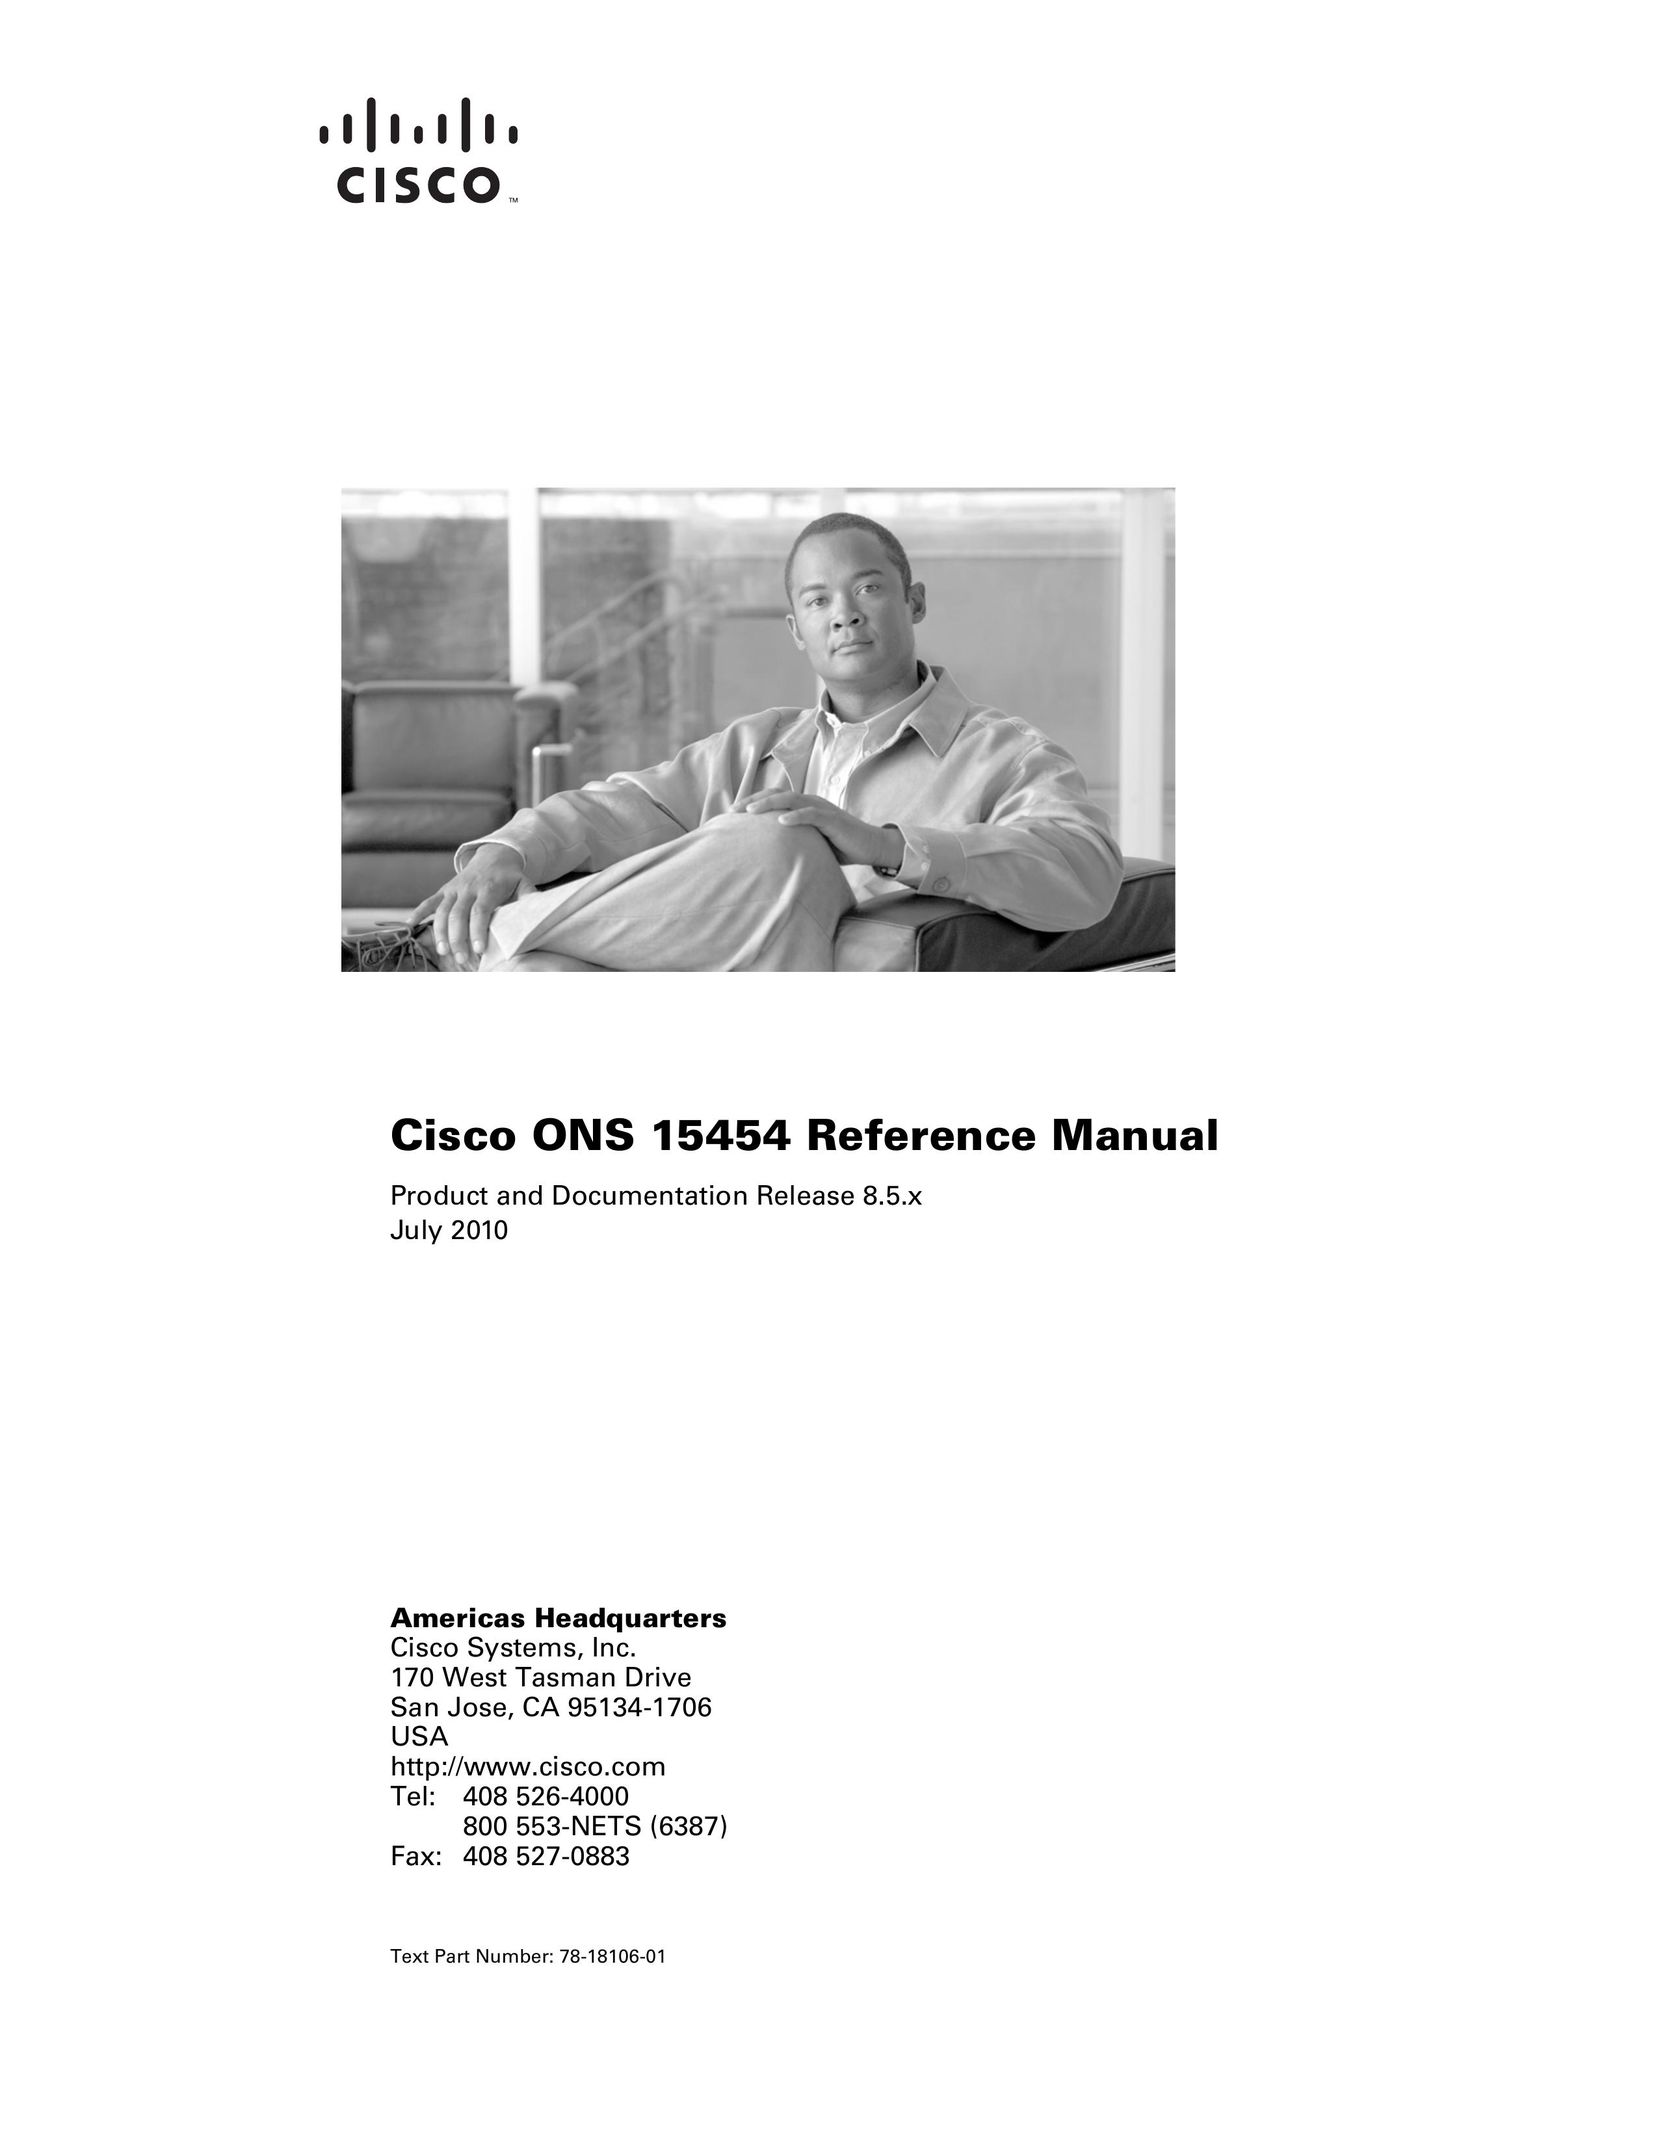 Cisco Systems 15454-FTF2 Home Security System User Manual